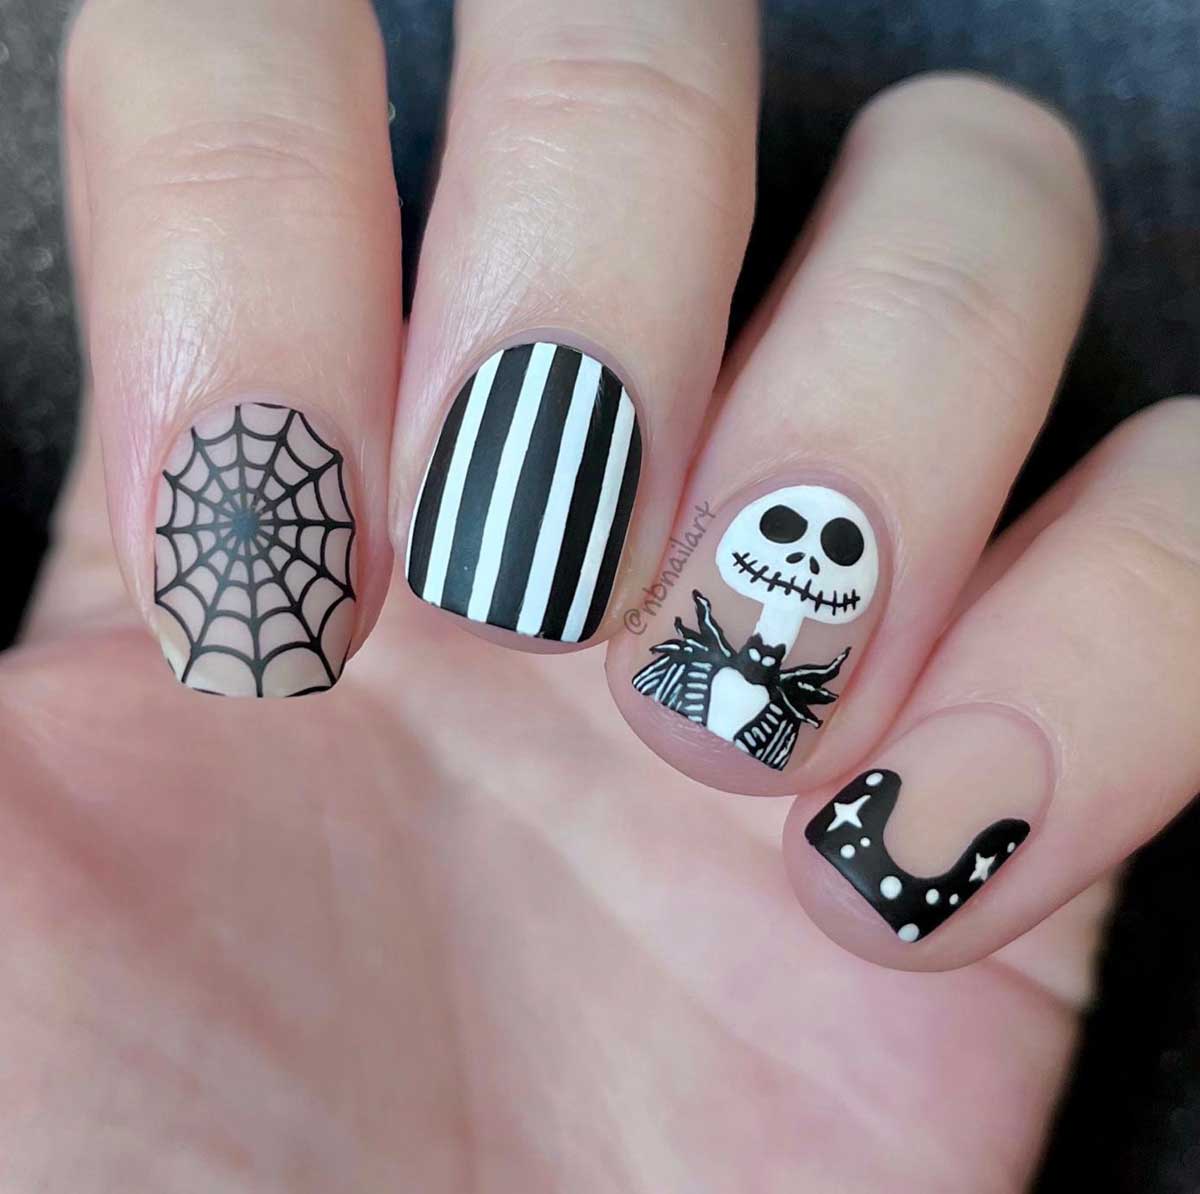 The Nightmare Before Christmas nail art